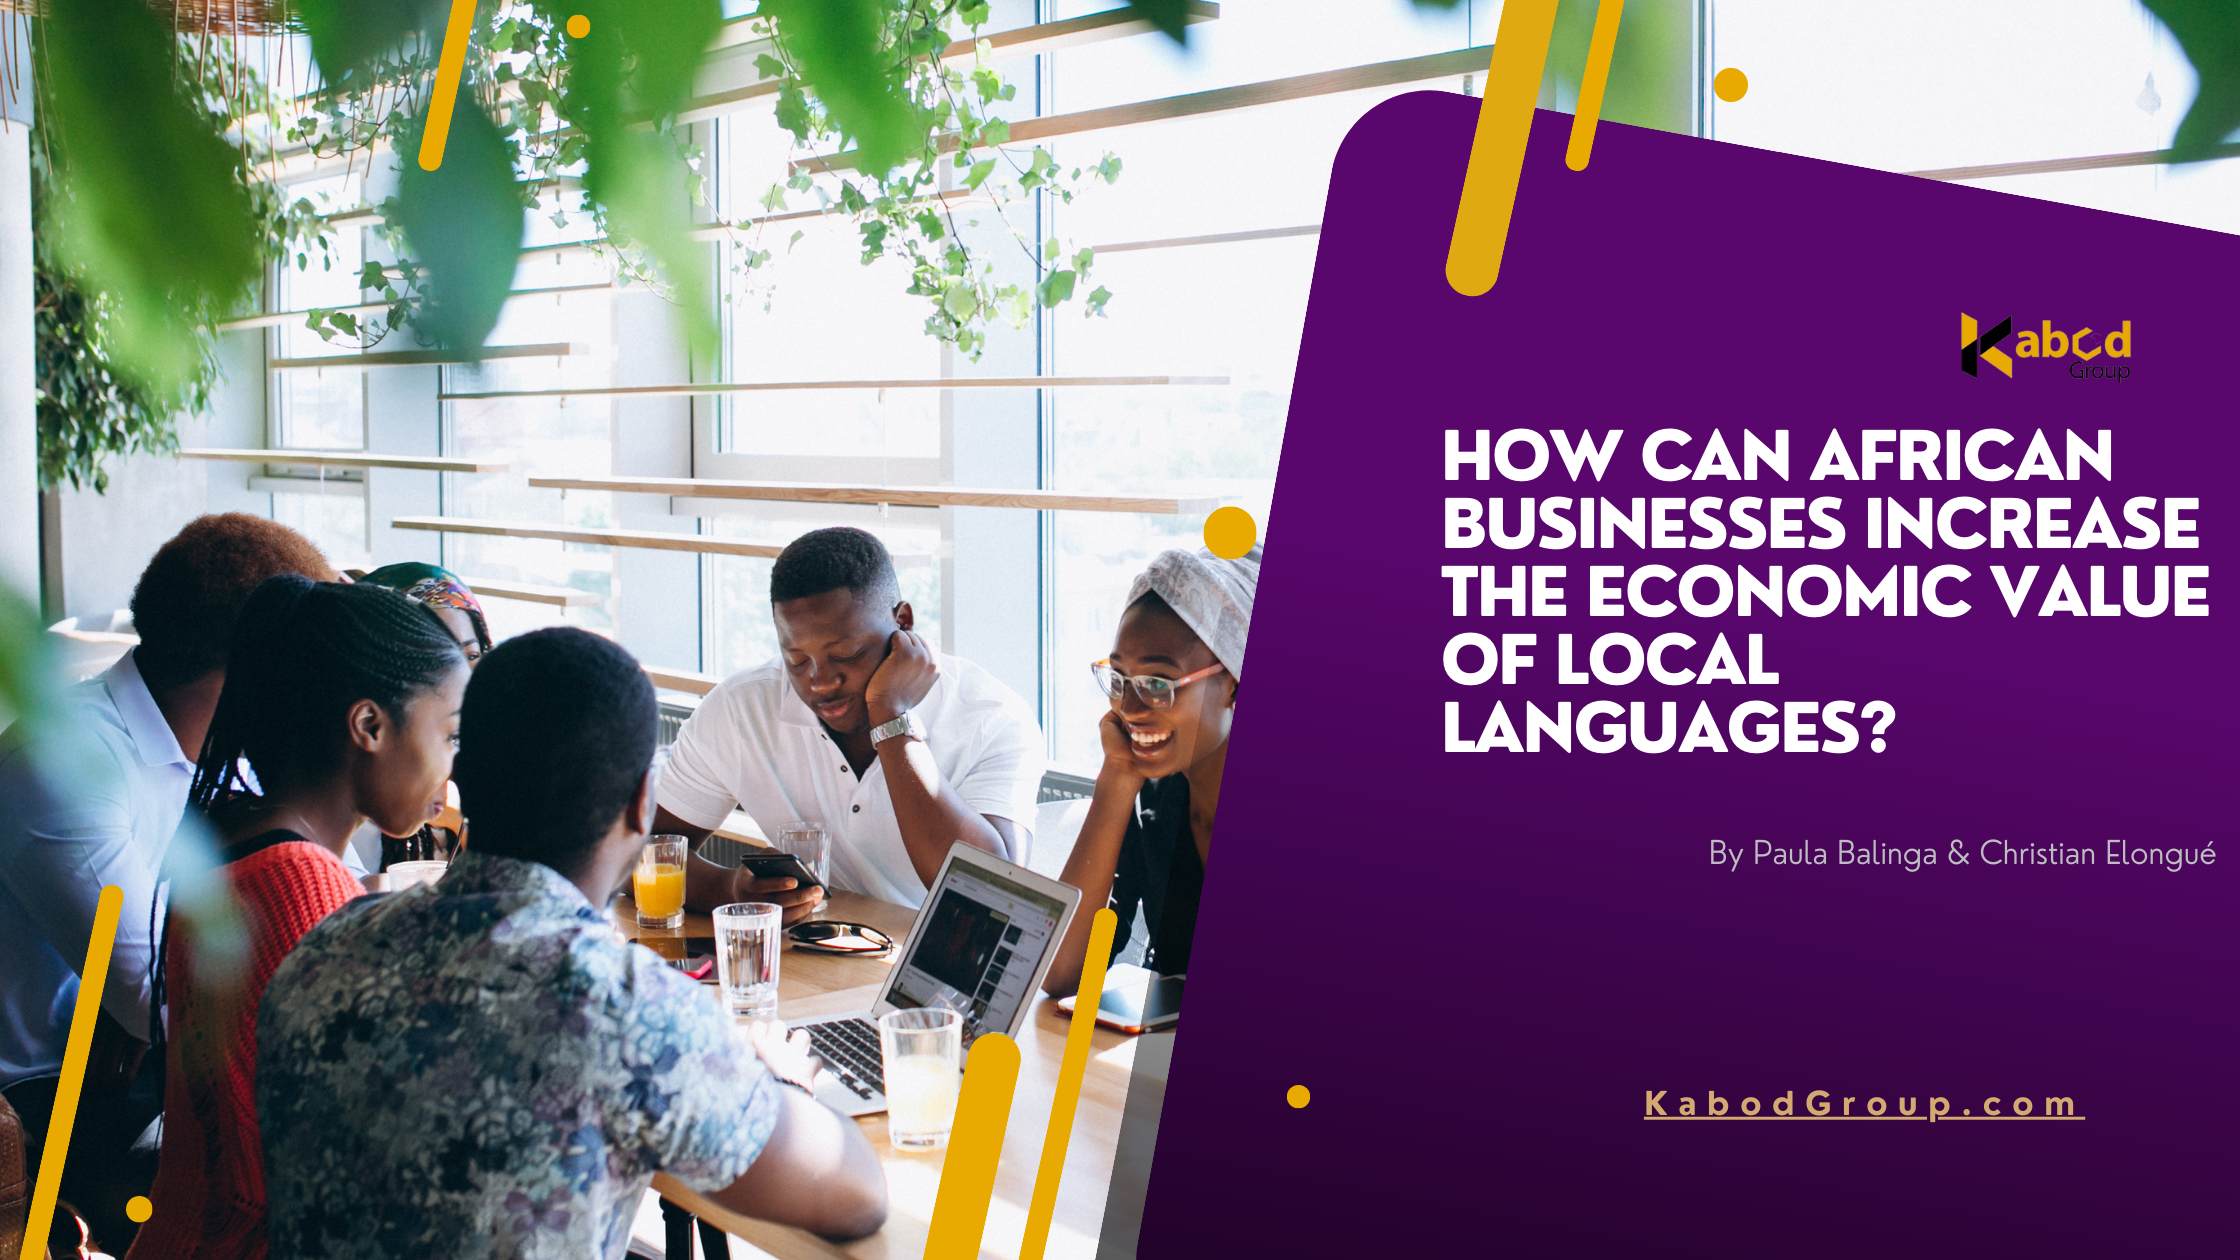 How can African businesses increase the economic value of local languages?